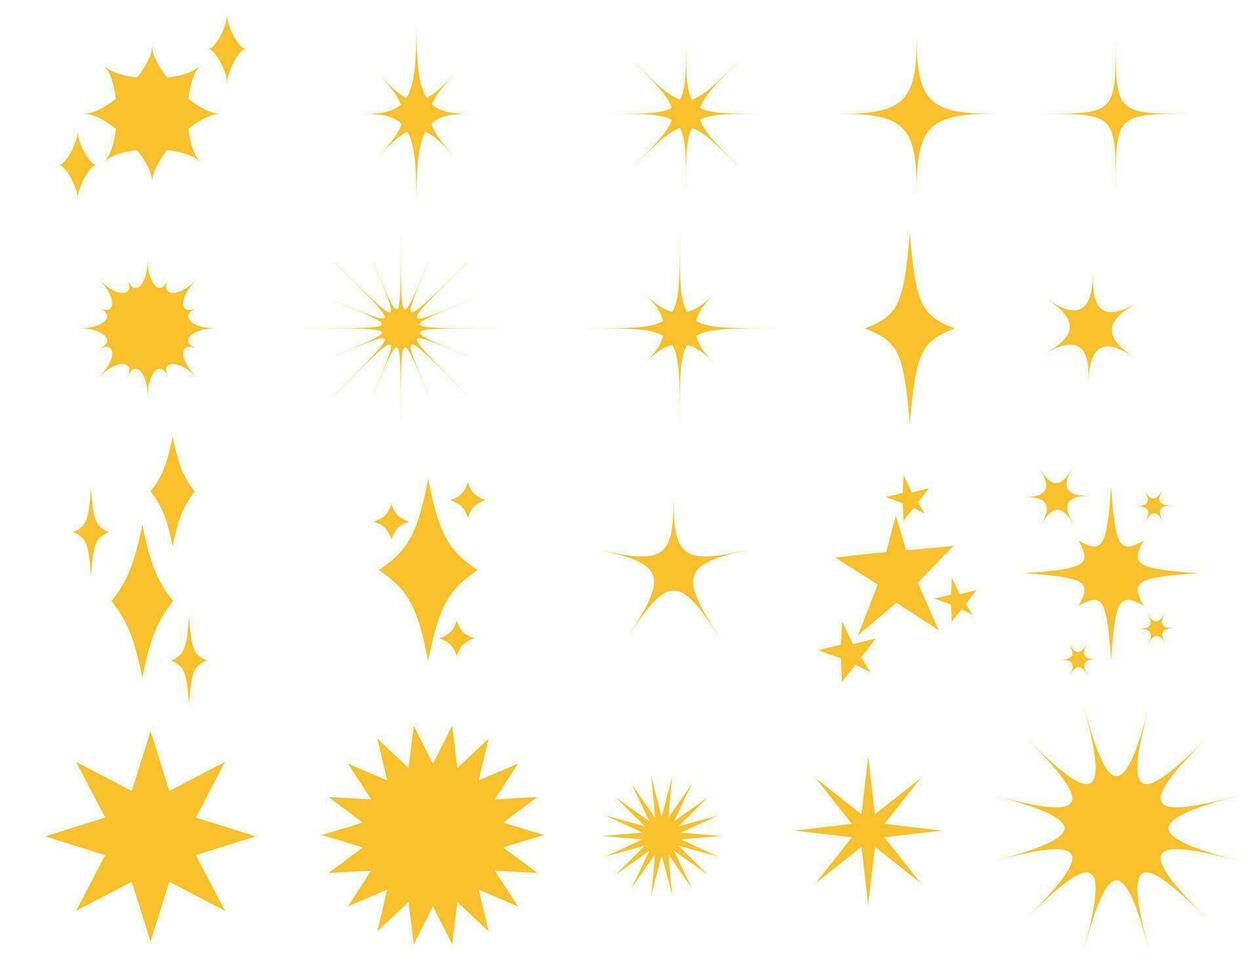 Big set of futuristic shiny stars. Star figures set. Abstract sign vector design with glitter effect. Templates for design, posters, projects, banners, logos and business cards.